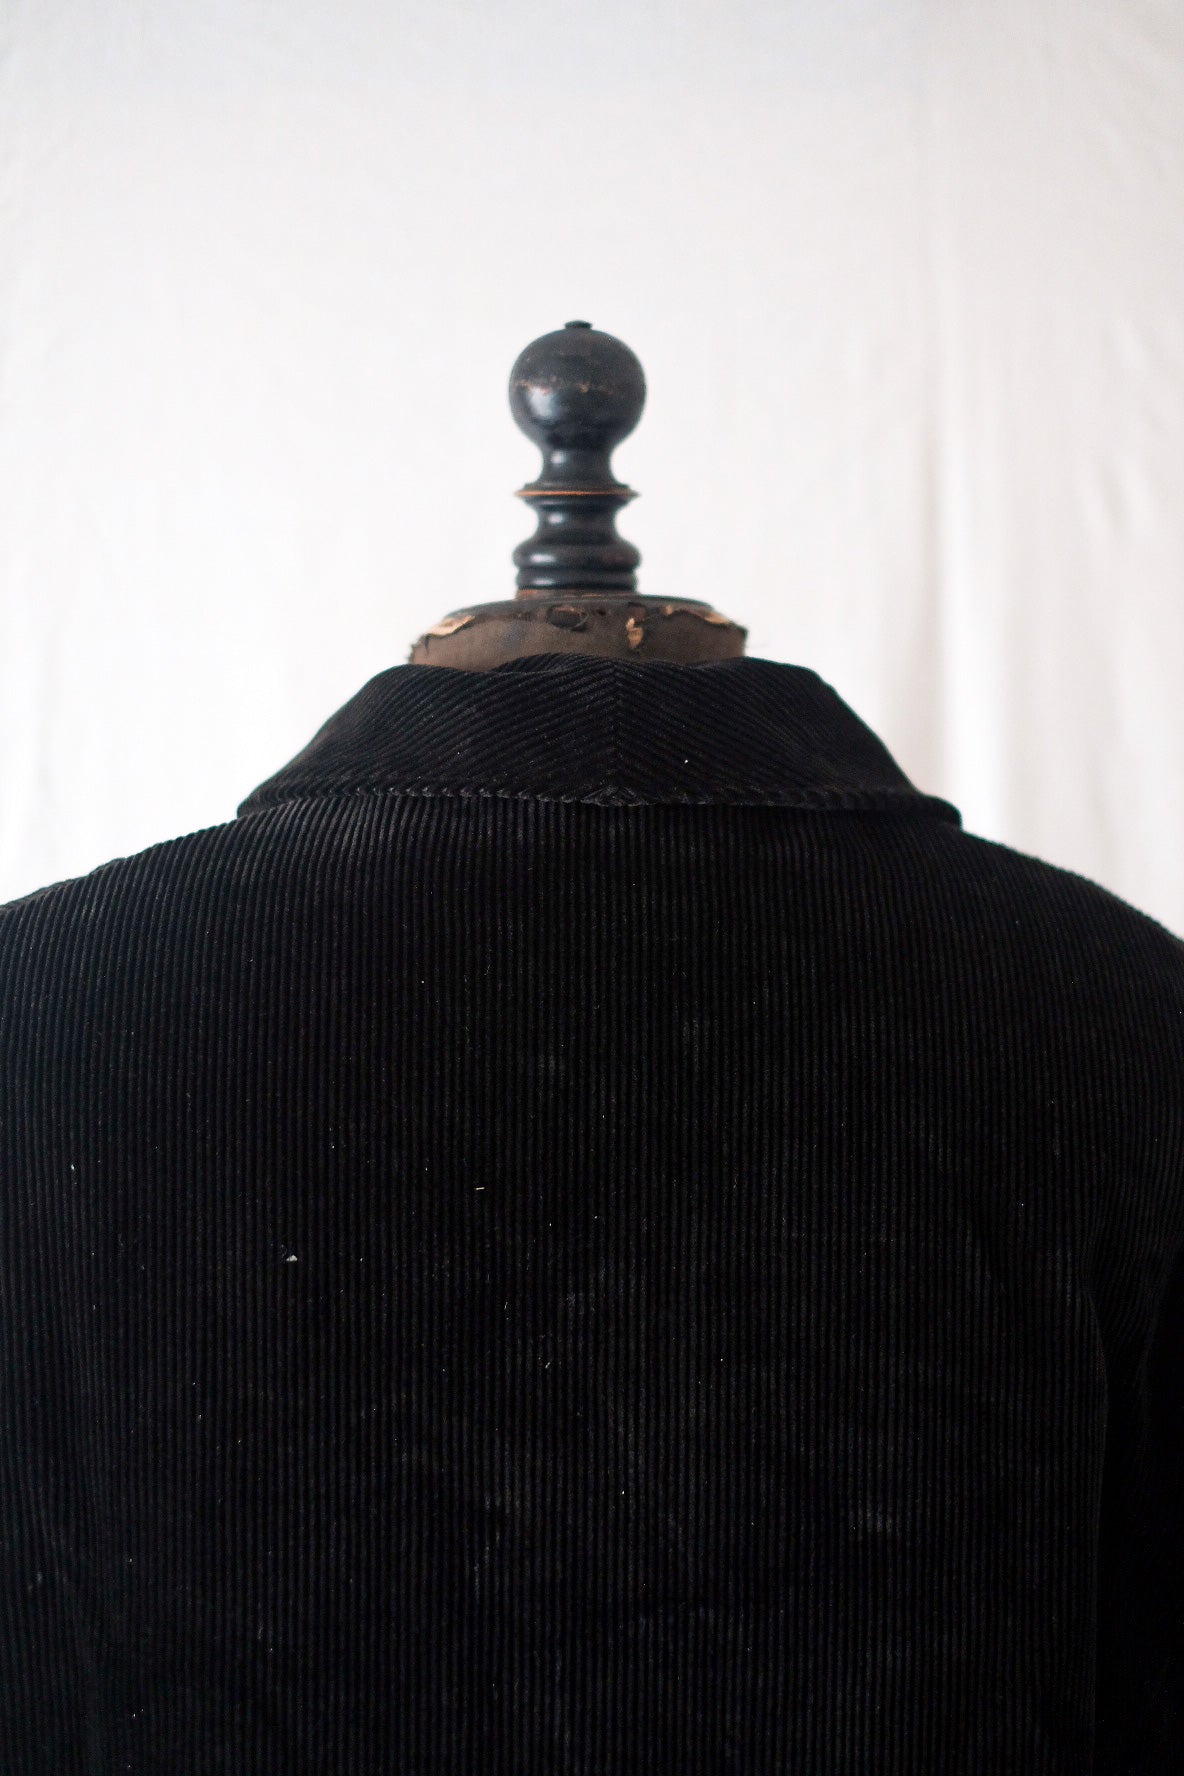 【~40's】French Vintage Black Corduroy Hunting Jacket “Dead Stock”